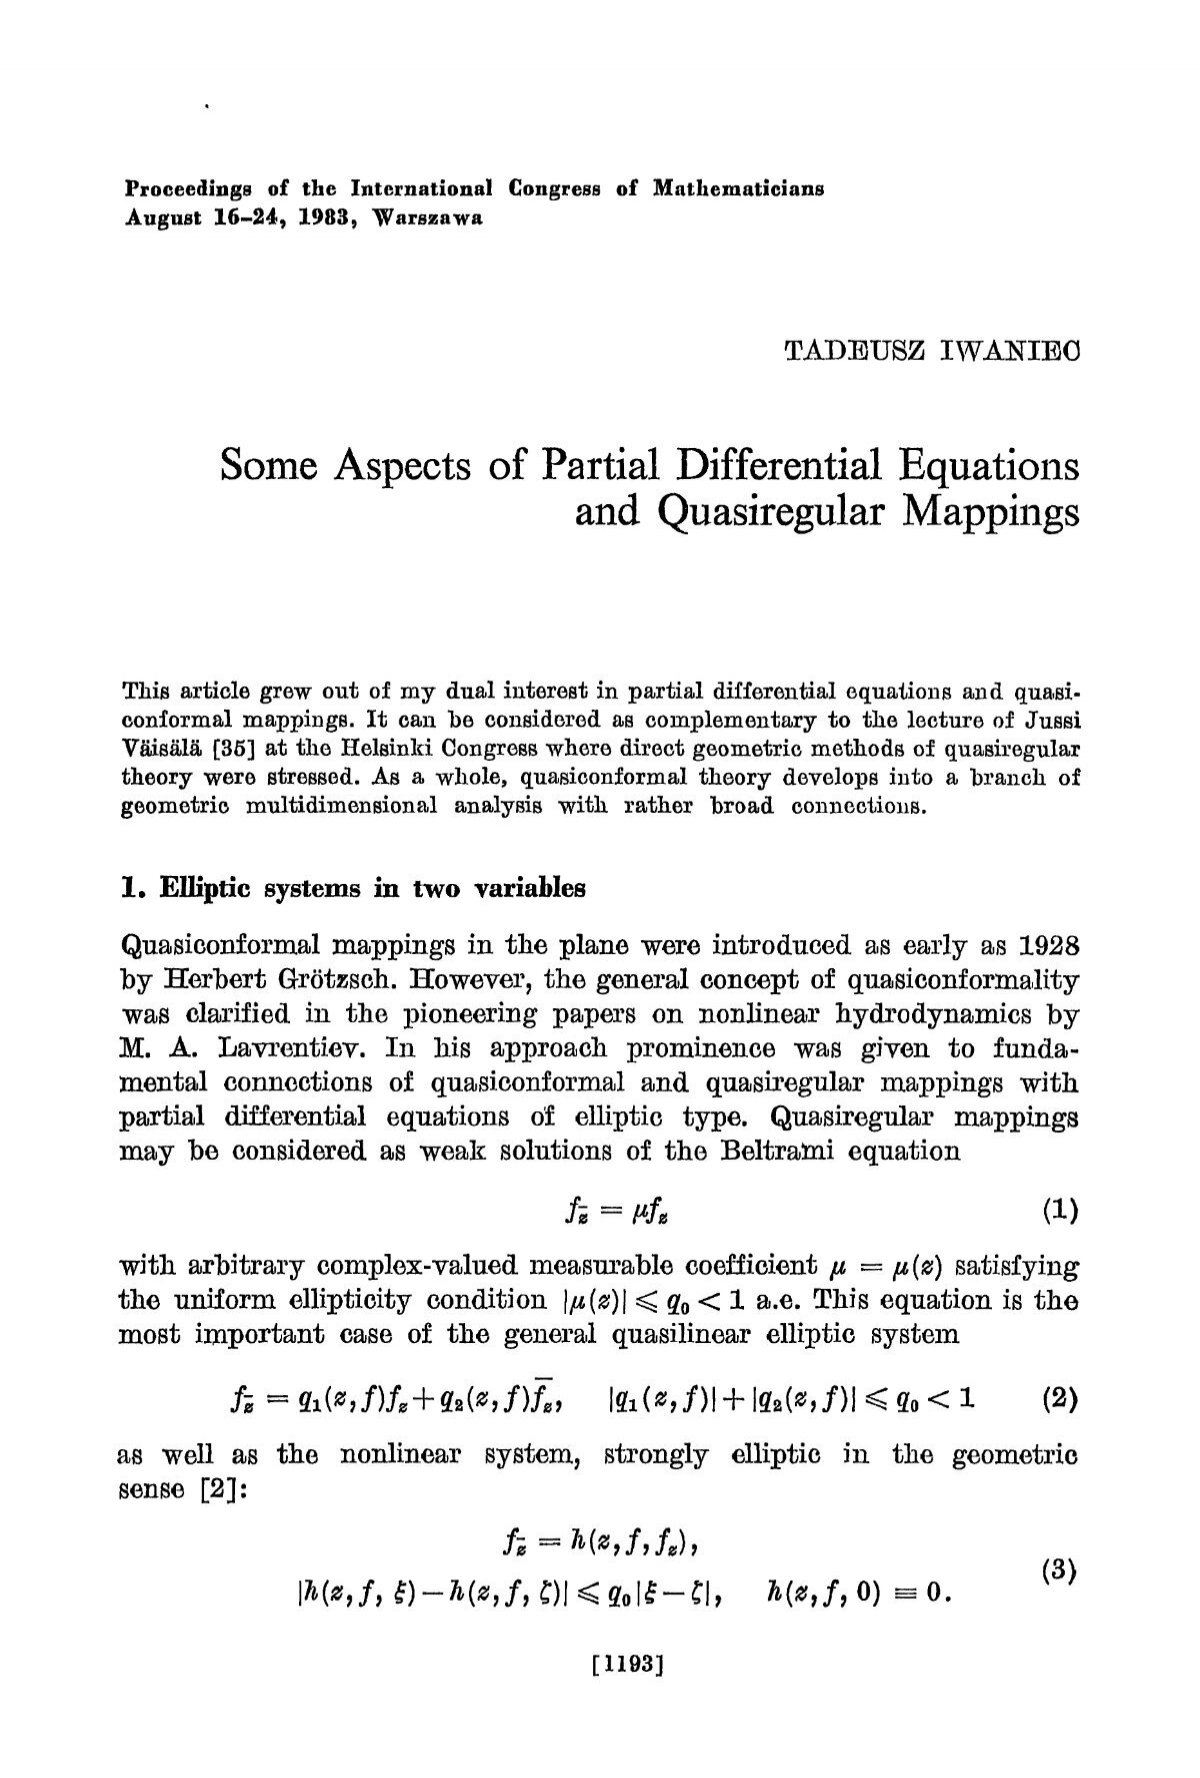 Some Aspects Of Partial Differential Equations And Quasiregular